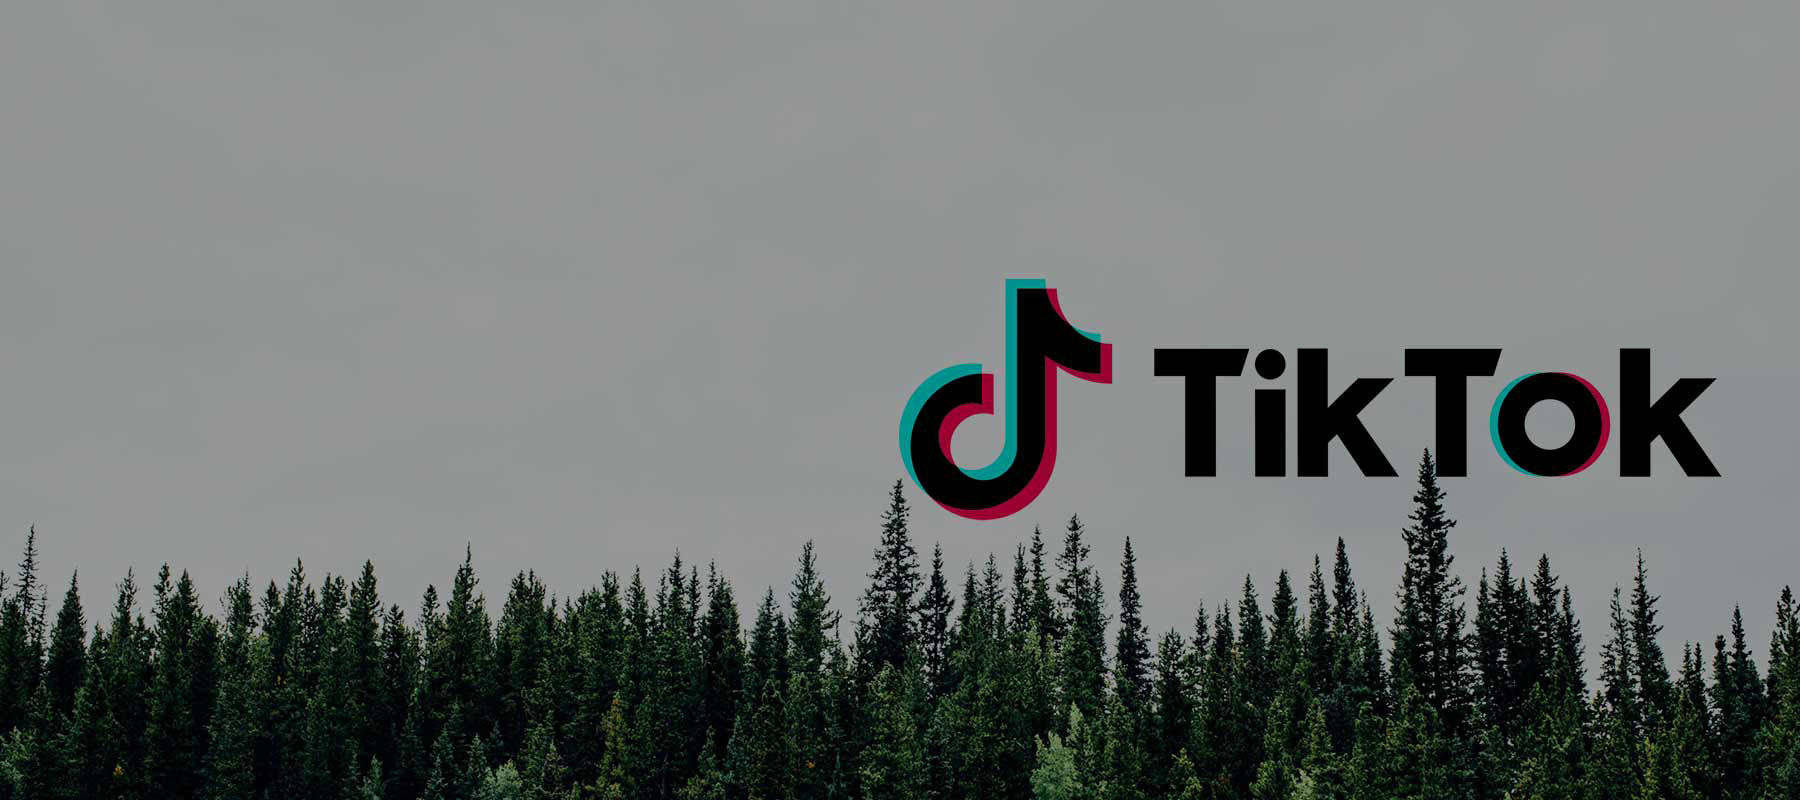 I'm now on TikTok! Because it's hip to be cool, right?